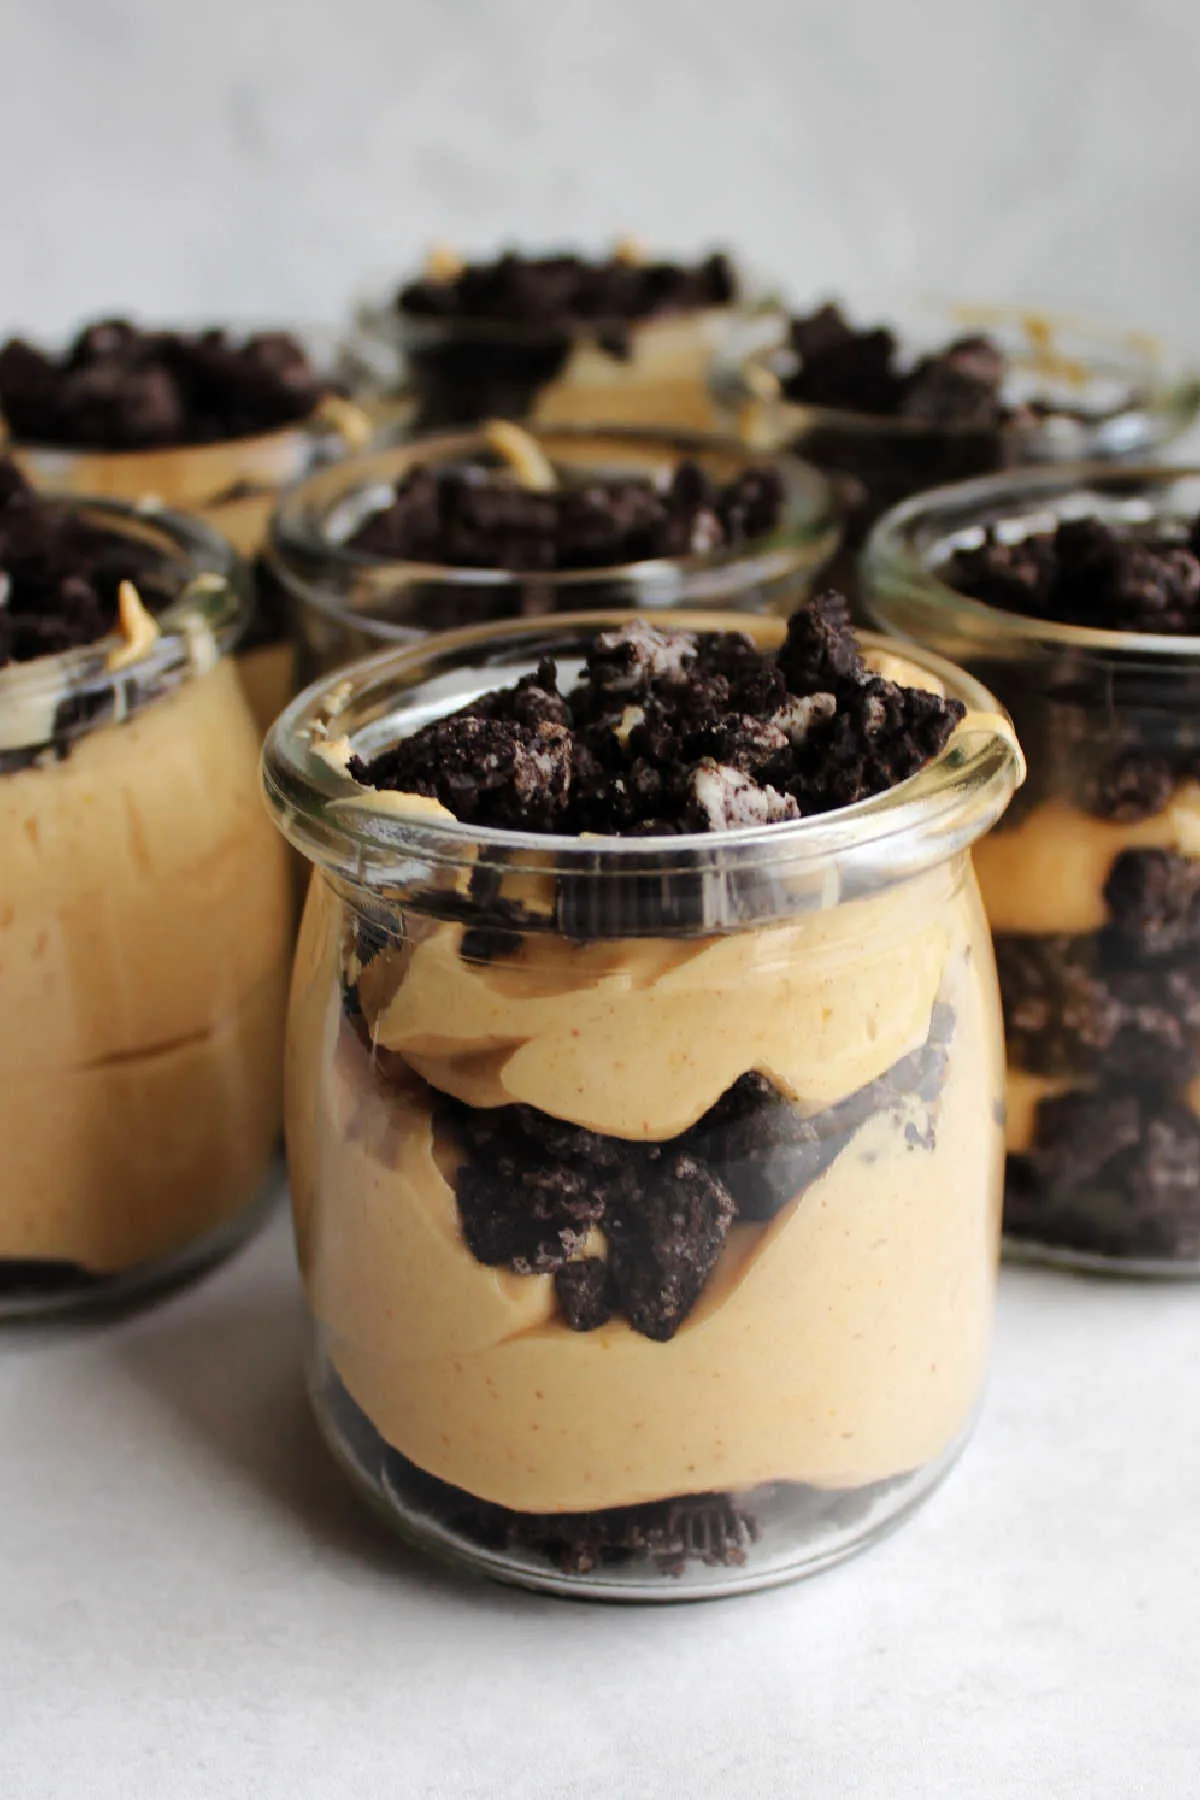 Small glass yogurt jars filled with layered chocolate cookie crumbs and peanut butter filling.